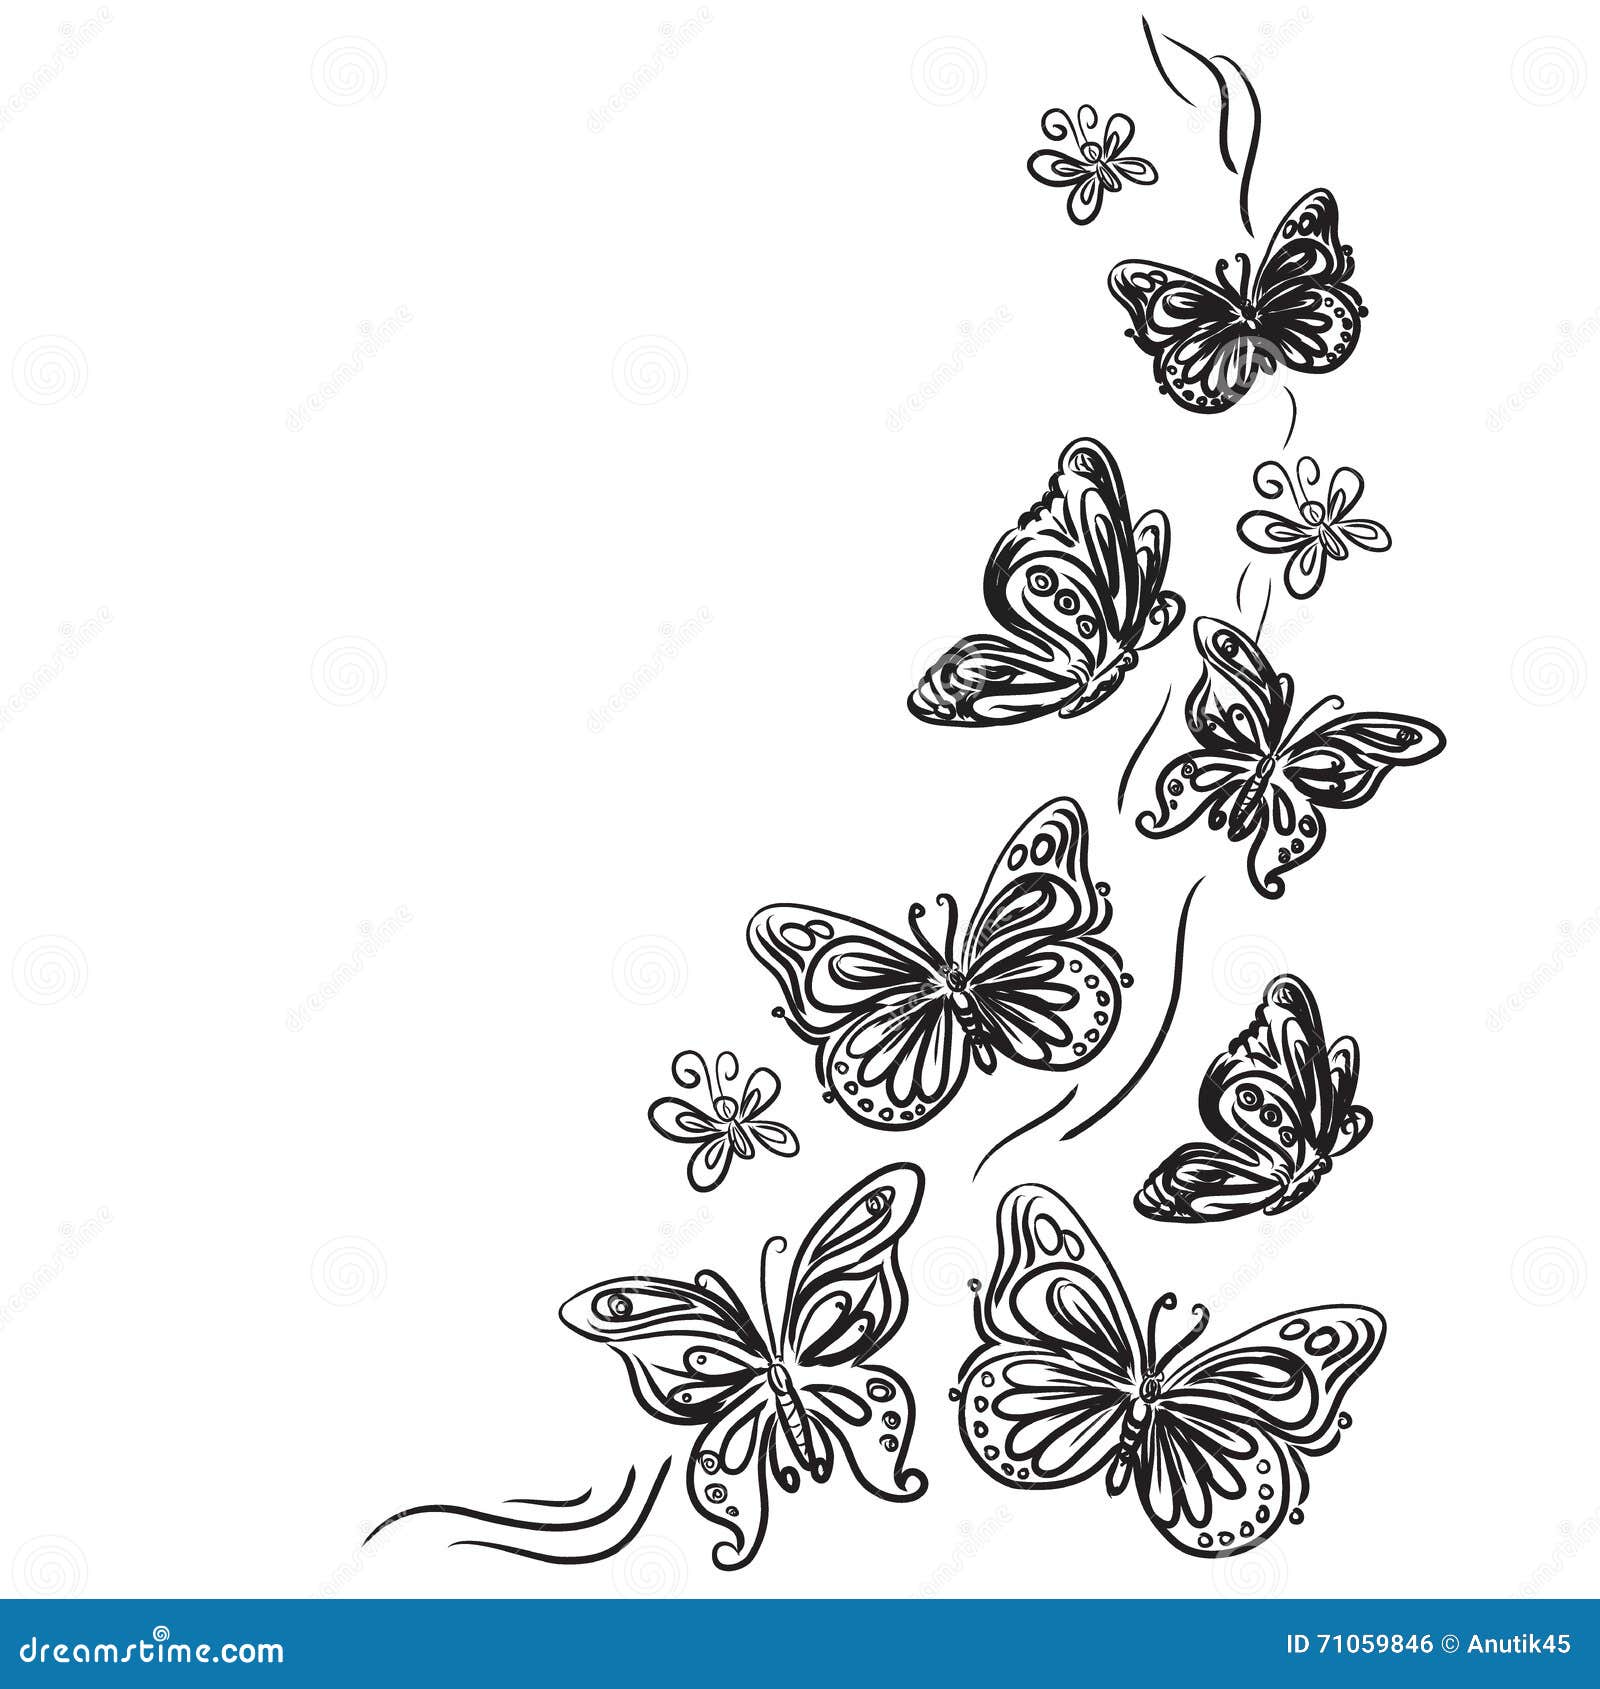 77,224 Simple Butterfly Designs Images, Stock Photos, 3D objects, & Vectors  | Shutterstock